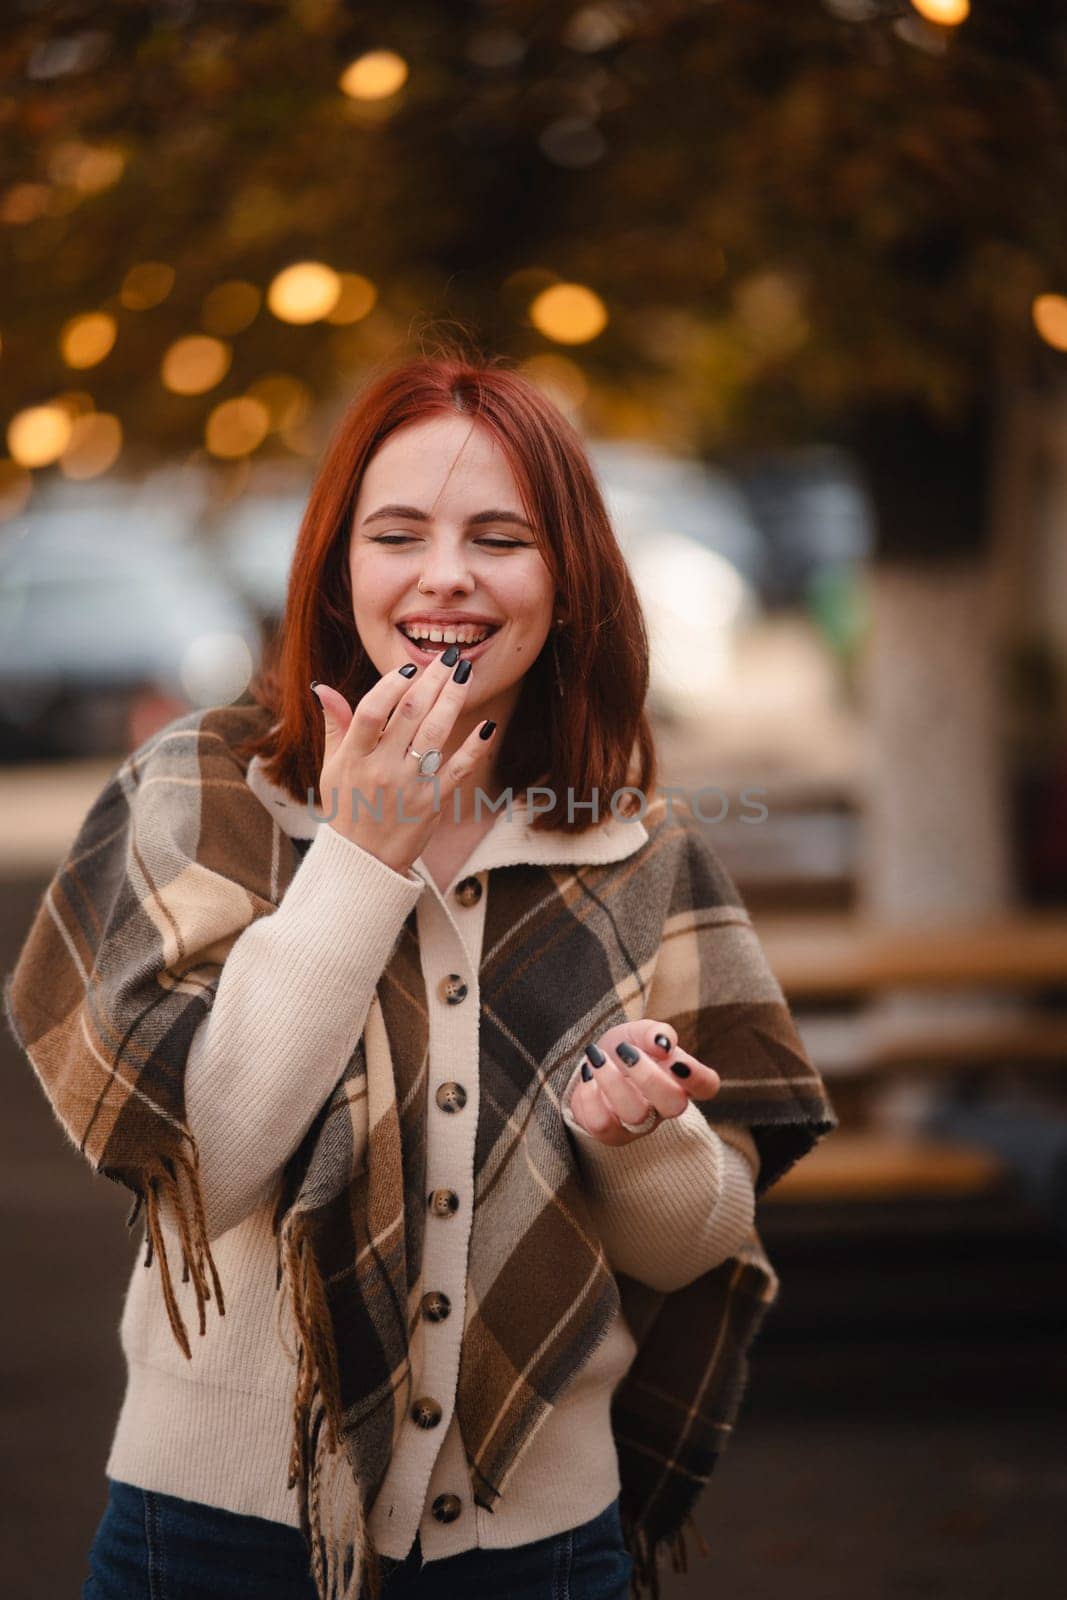 A cheerful redhead beams with joy on the streets of the autumn city. High quality photo